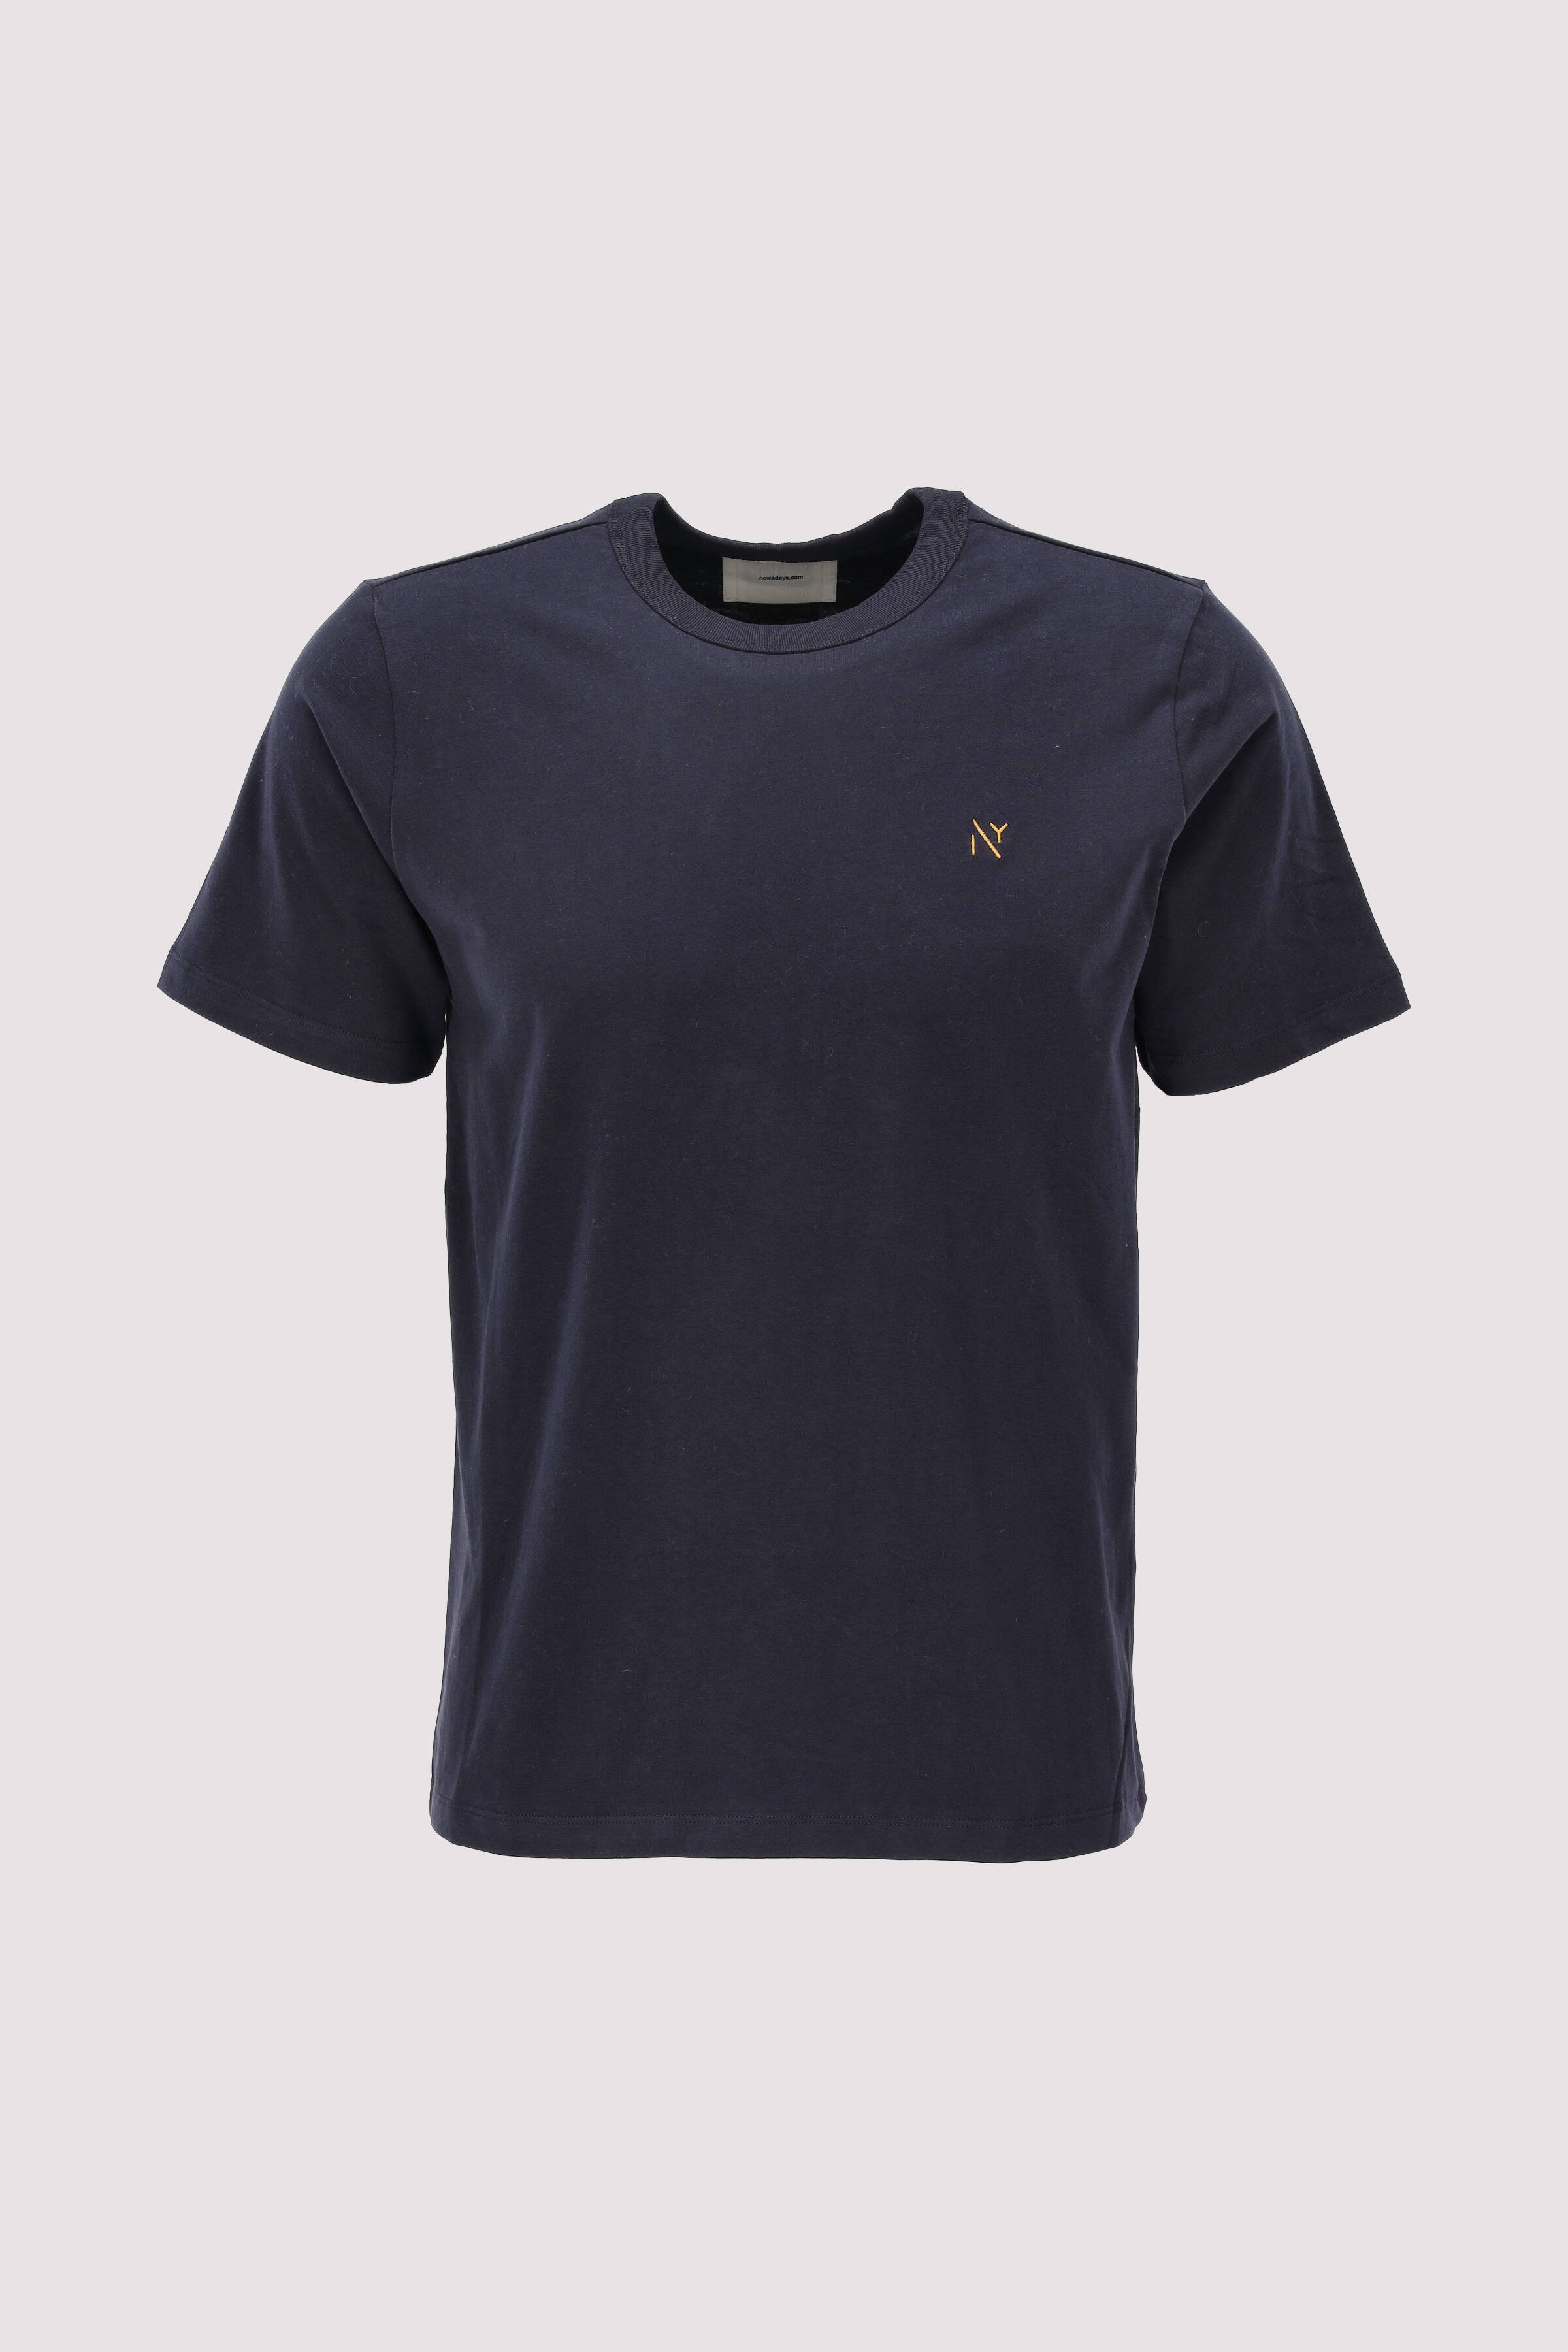 The Peached T-Shirt